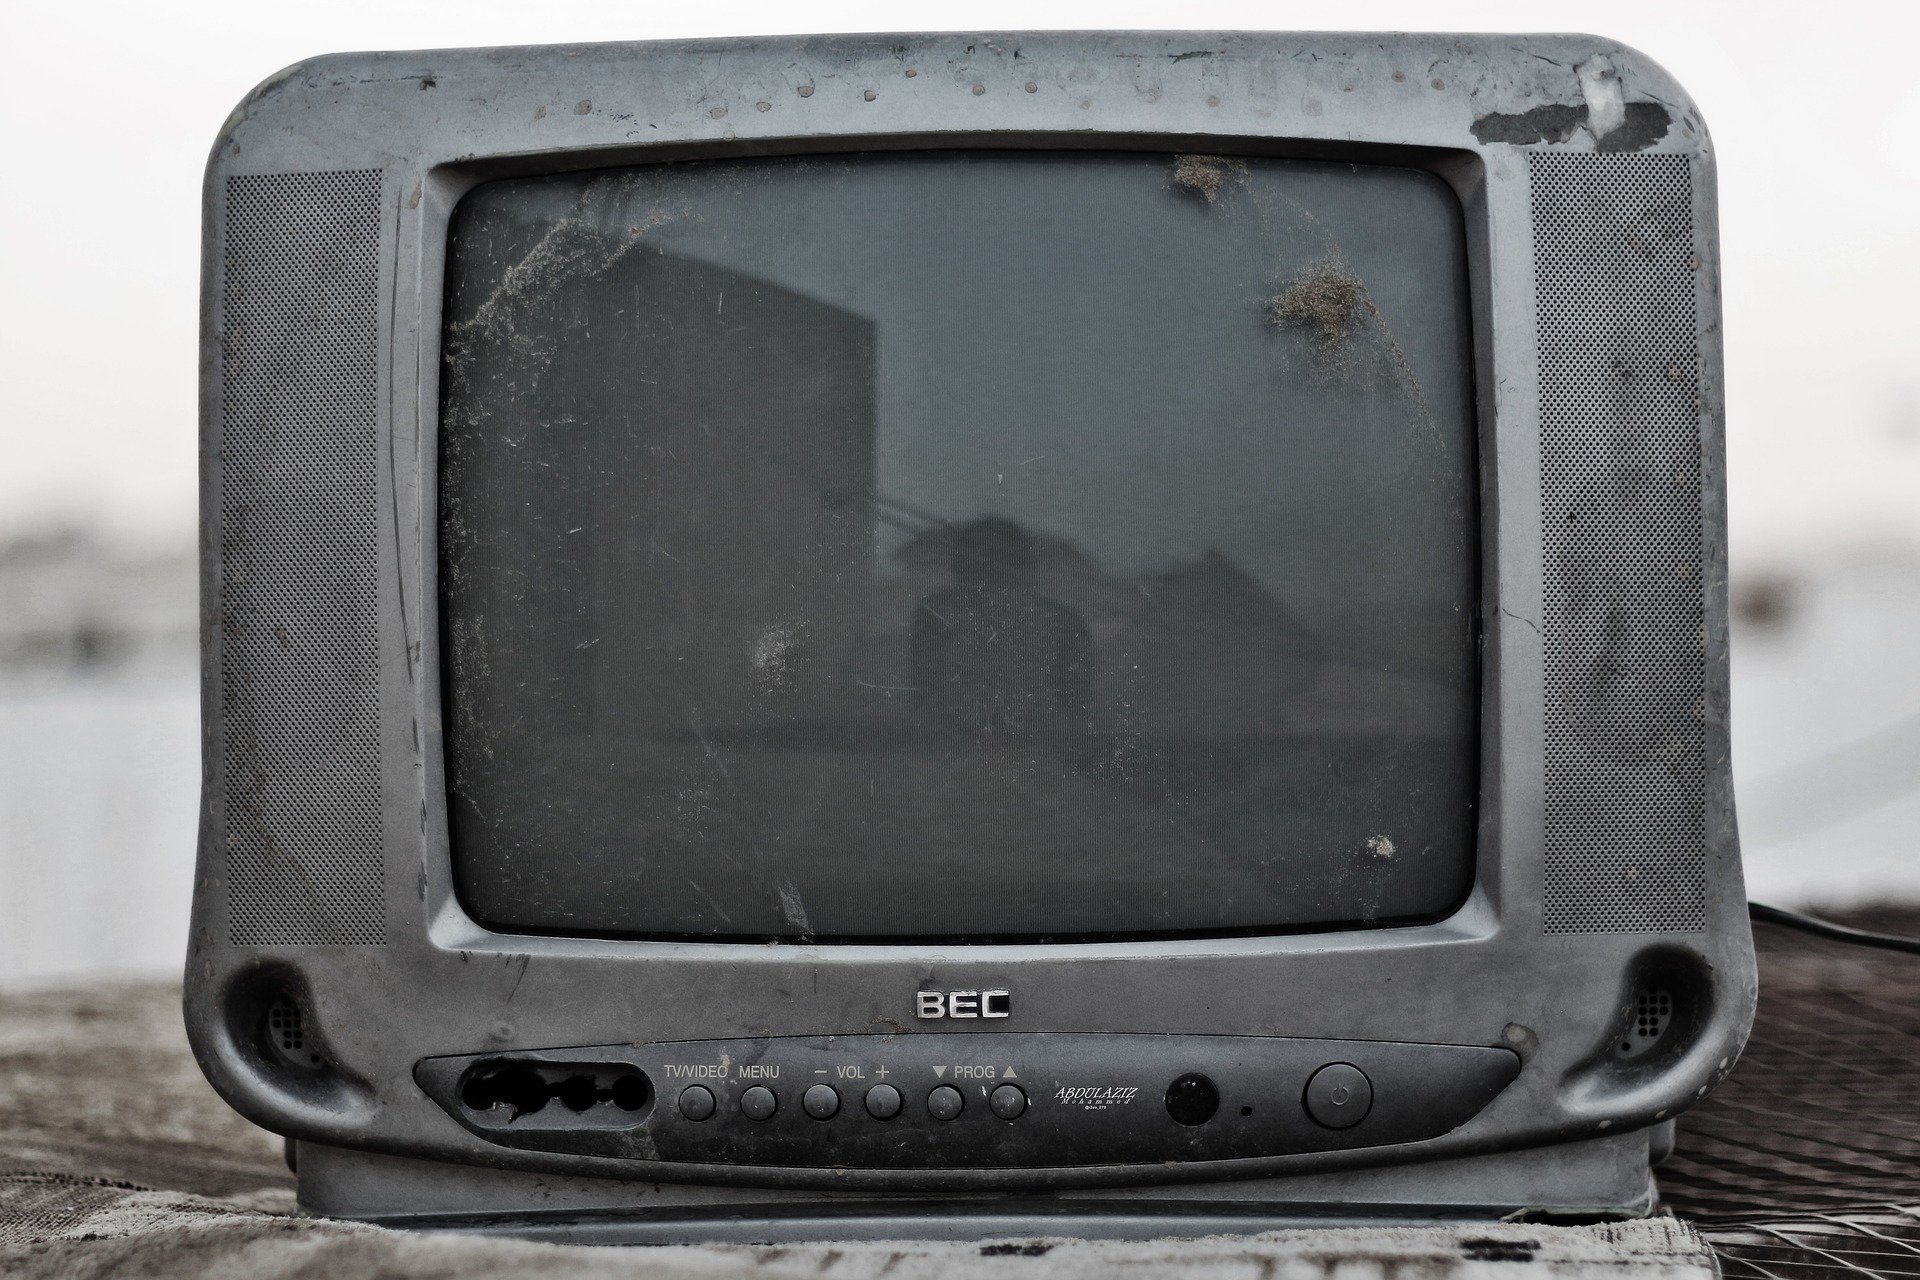 County Solid Waste District to hold television recycling event Mar. 13